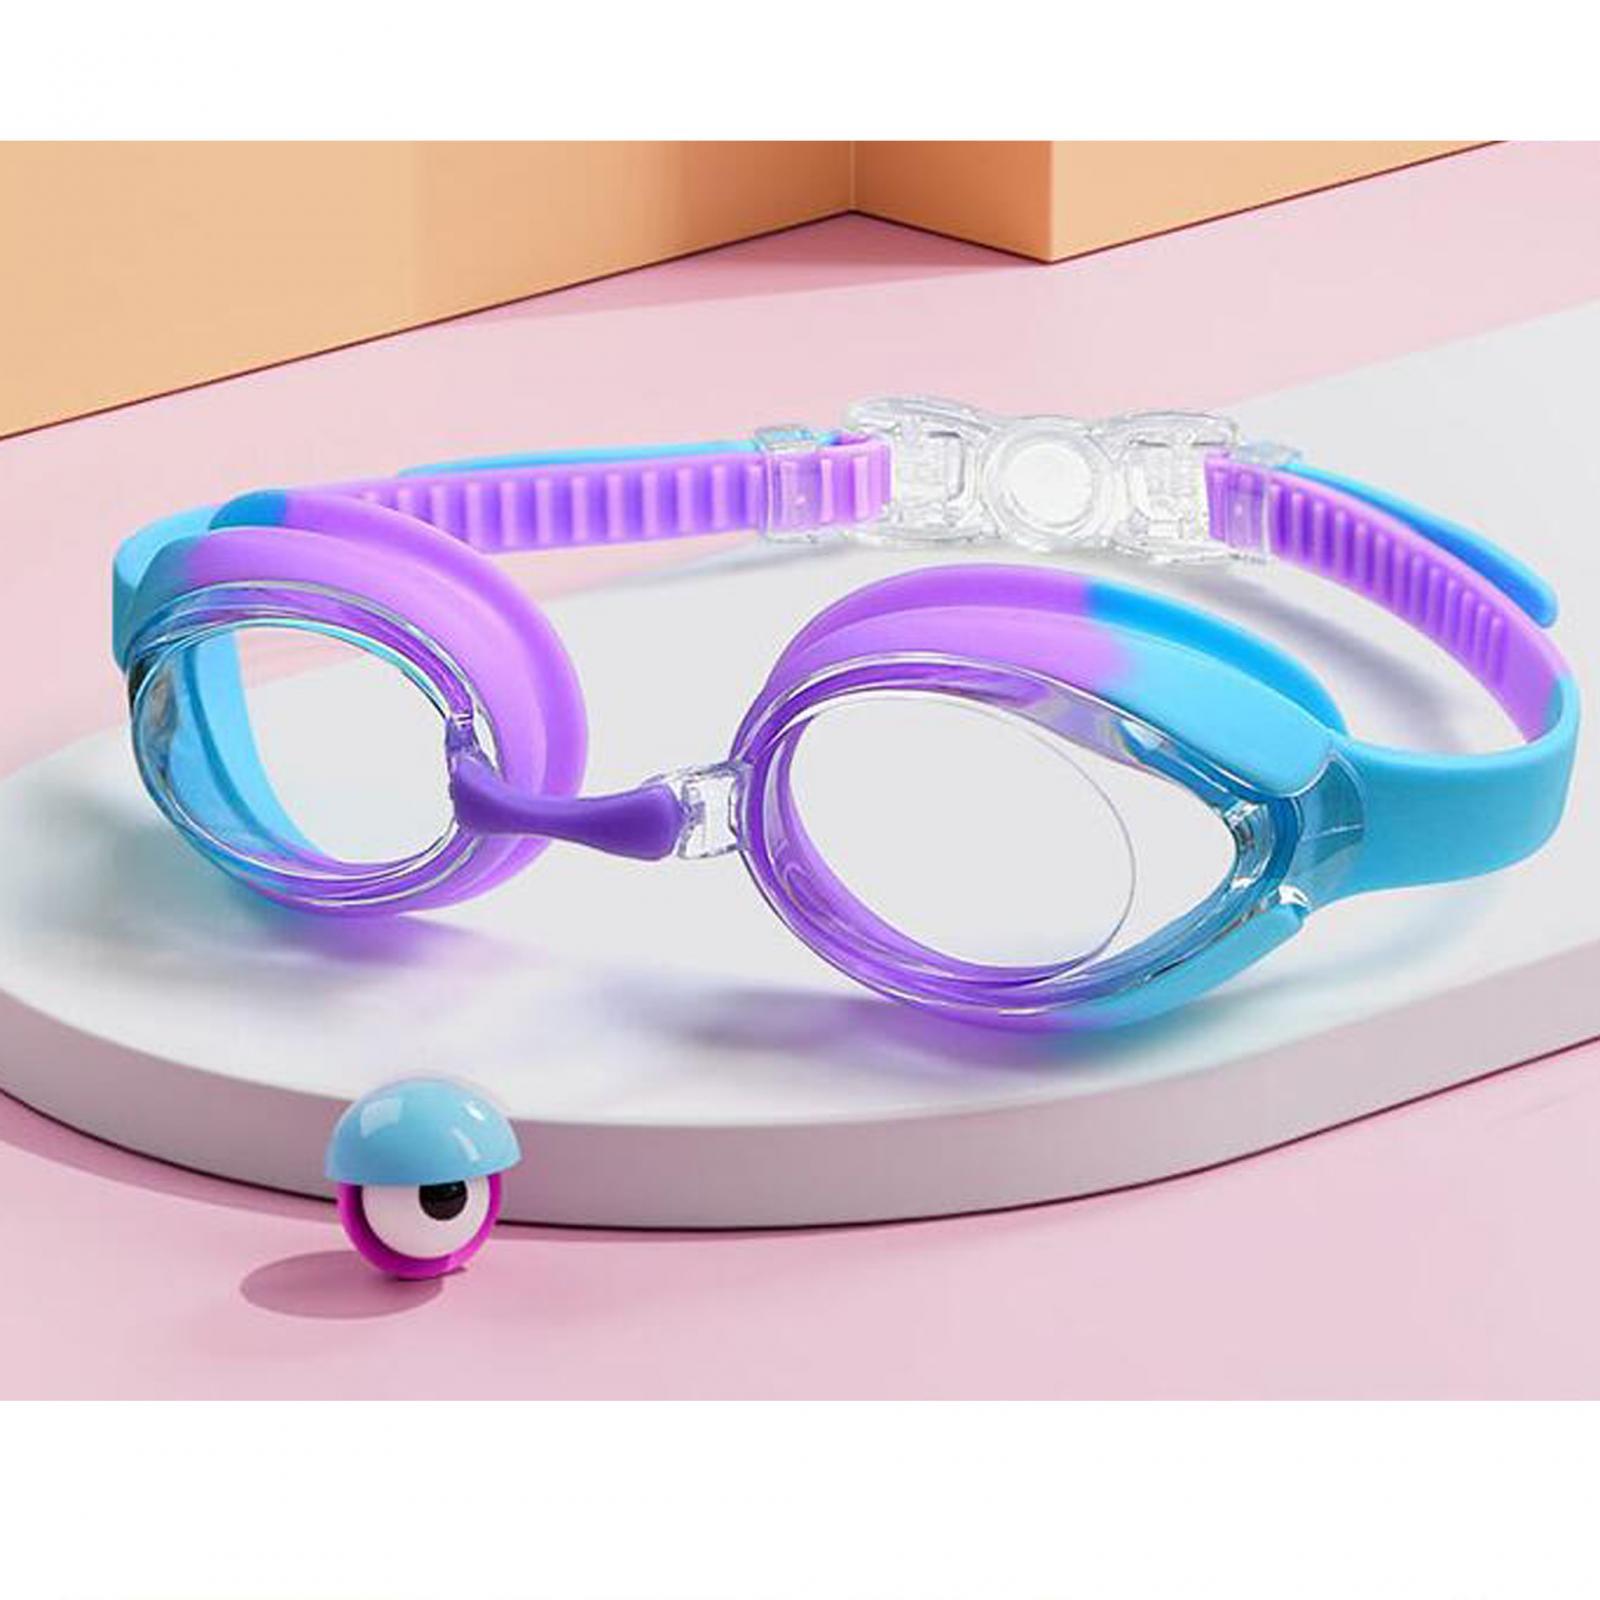 Swimming Goggles Comfortable No Leaking Clear Vision Boys Girls Swim Goggles Clear and Purple